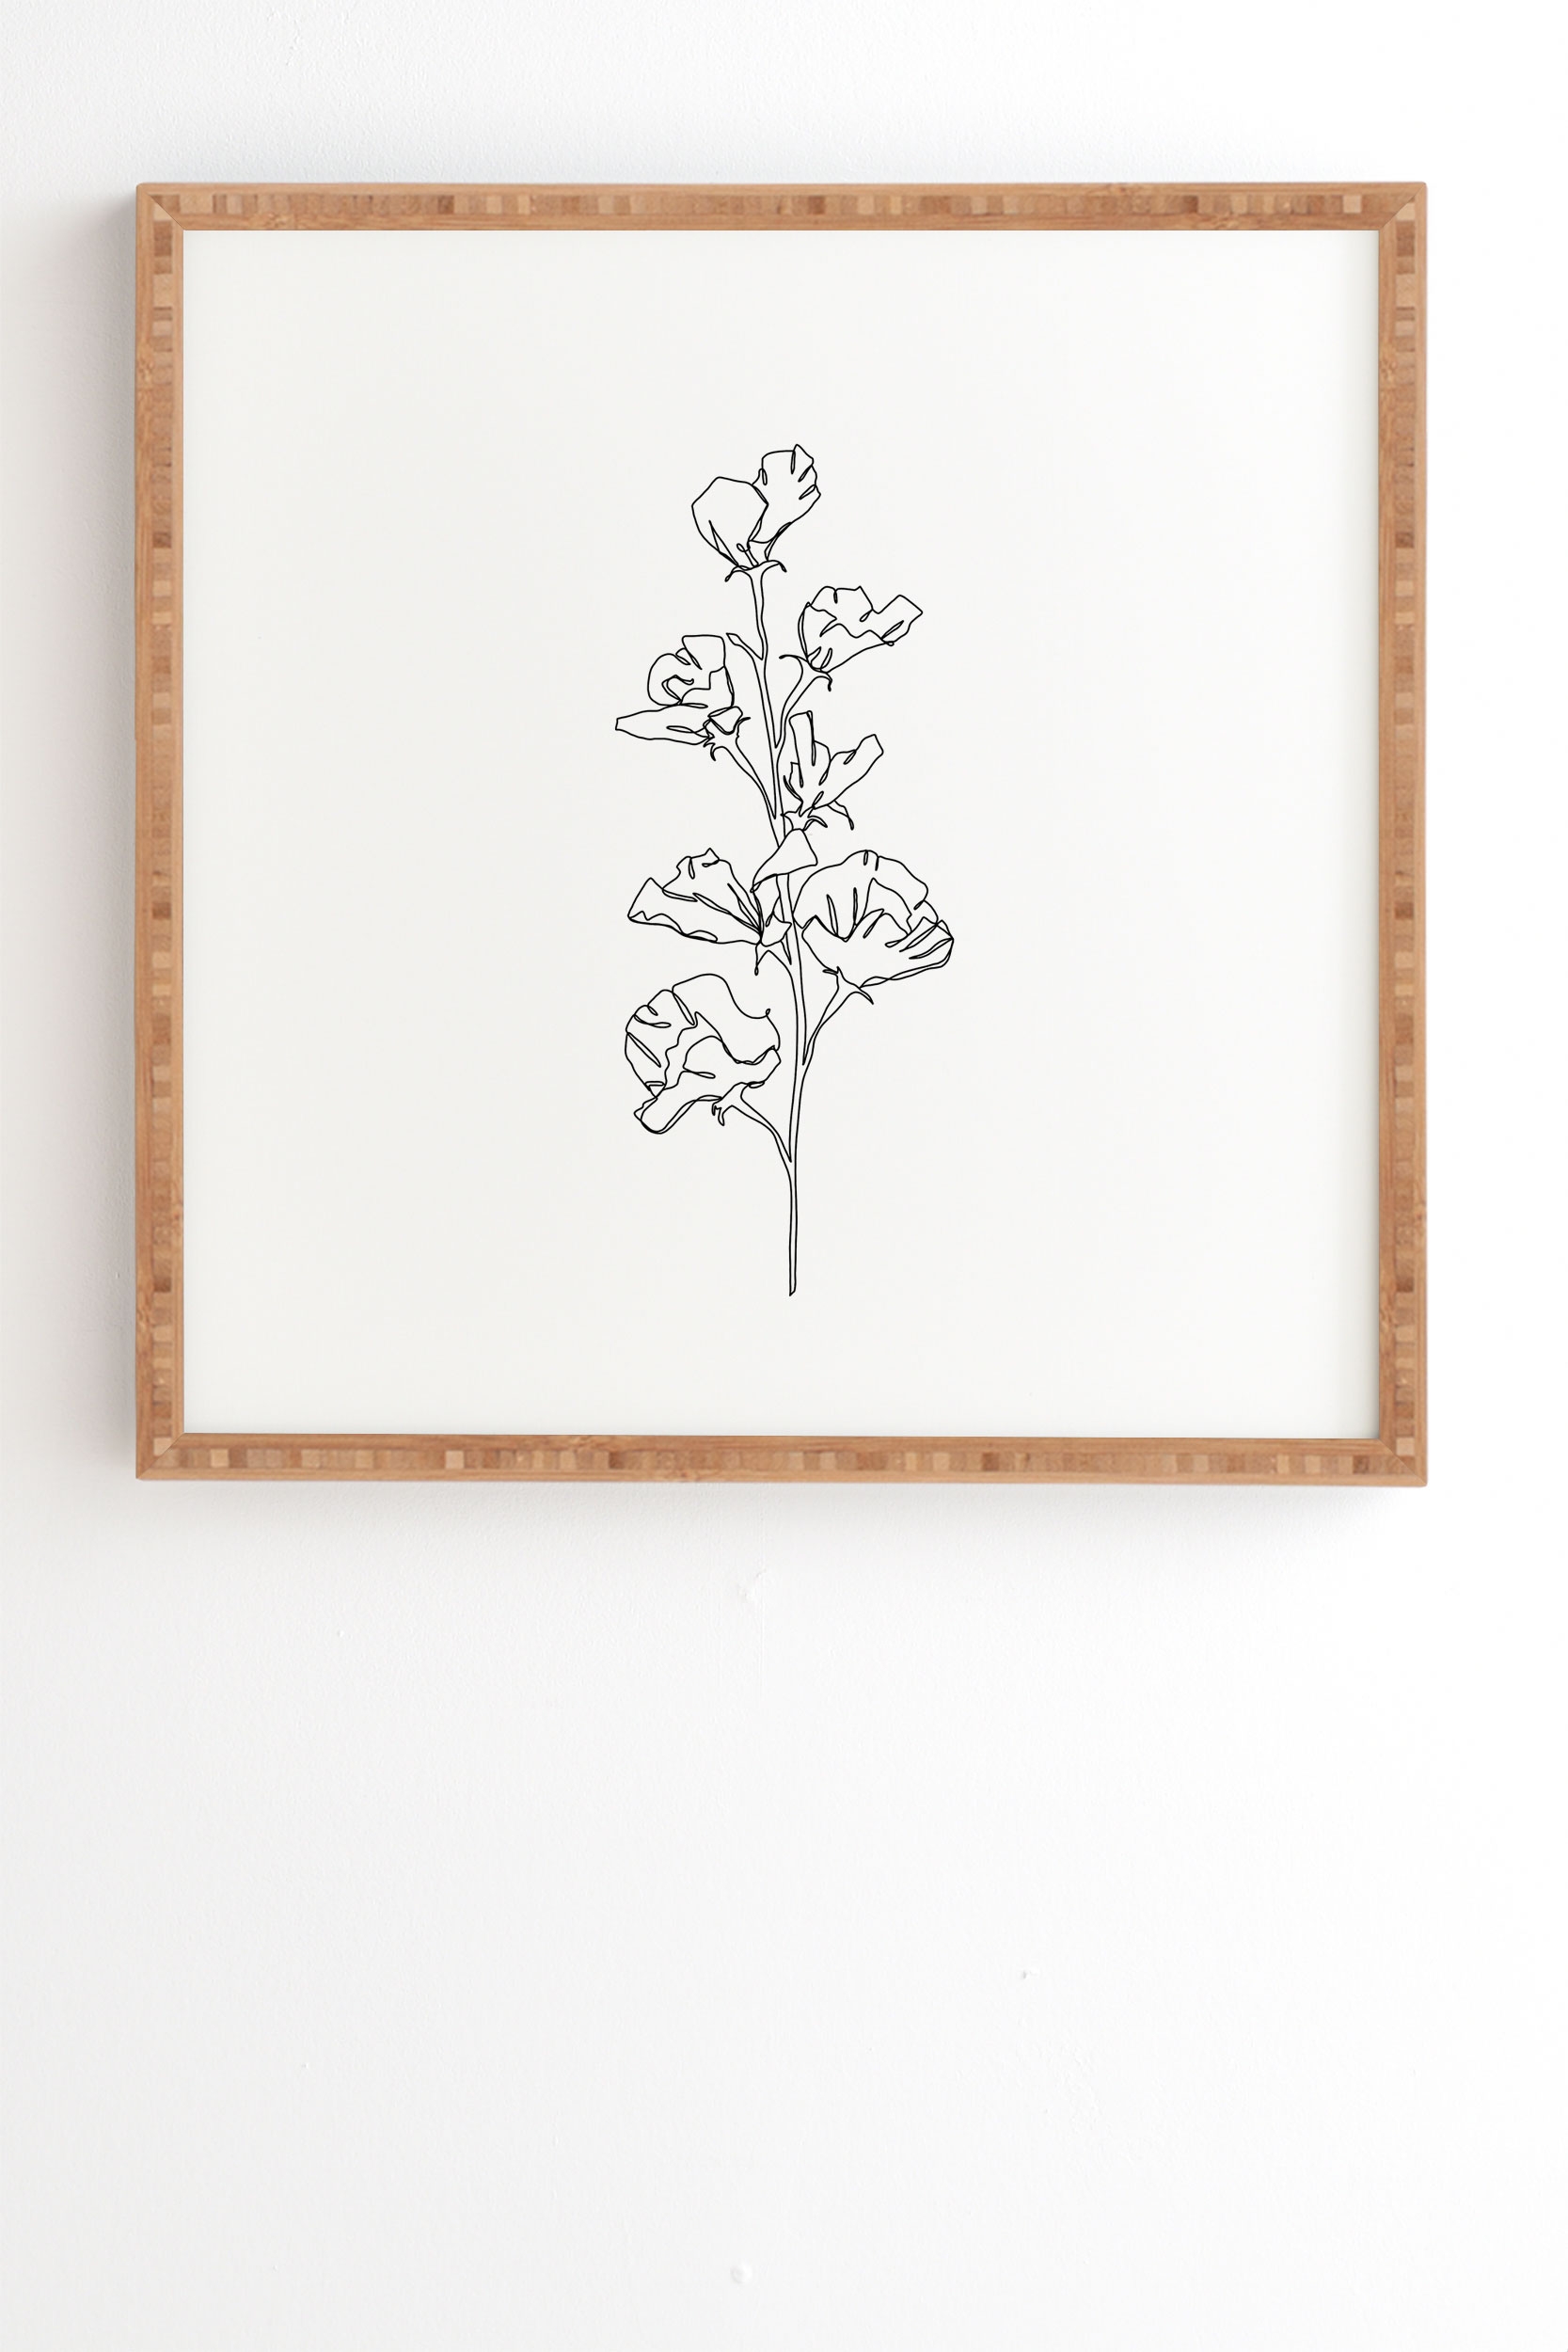 Cotton Flower Illustration by The Colour Study - Framed Wall Art Bamboo 8" x 9.5" - Image 1